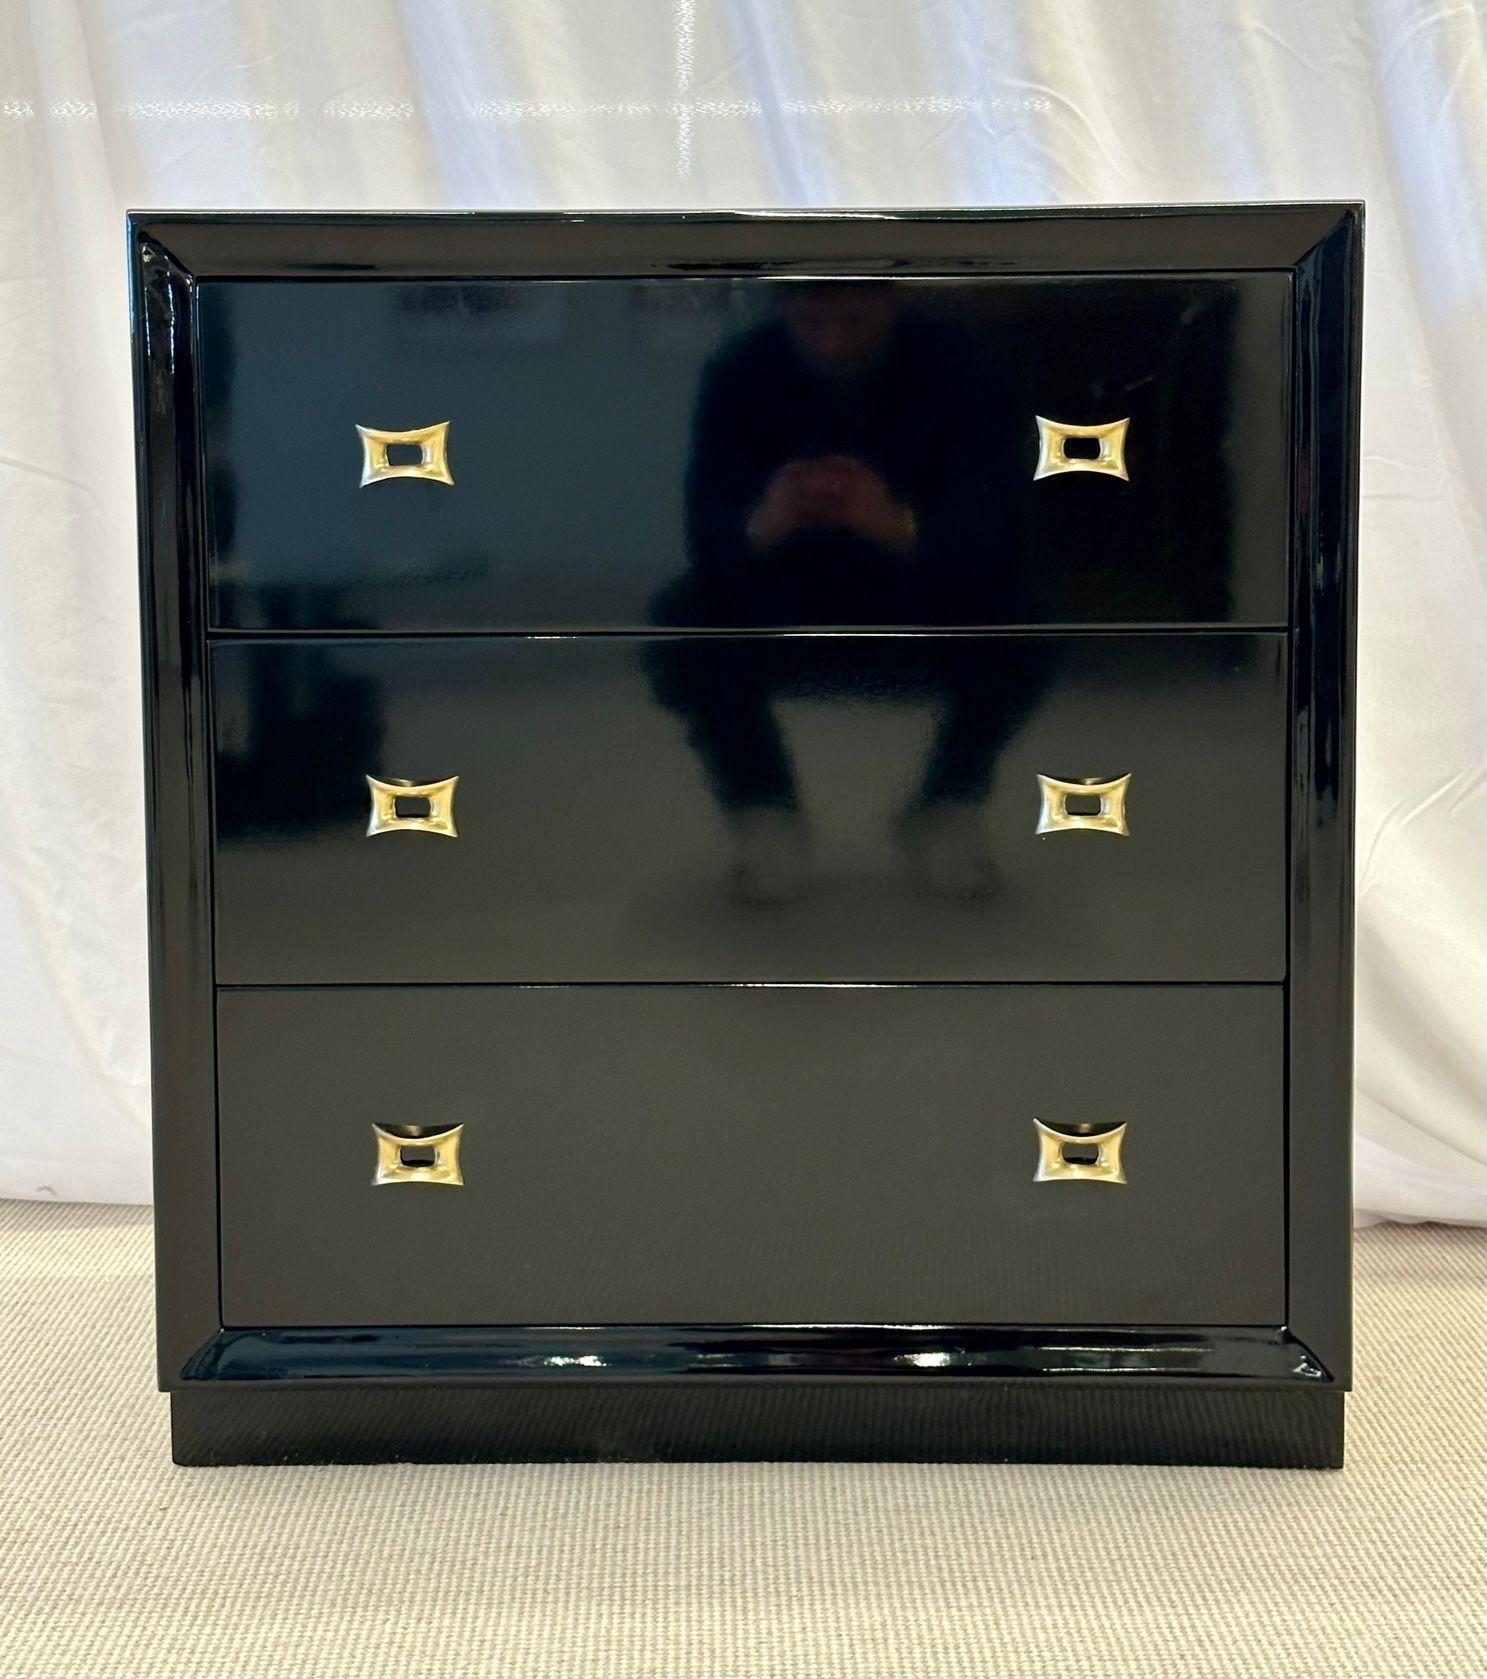 Mid-20th Century Pair of Mid-Century Modern Ebony Cabinets / Nightstands, Chests, Lacquer